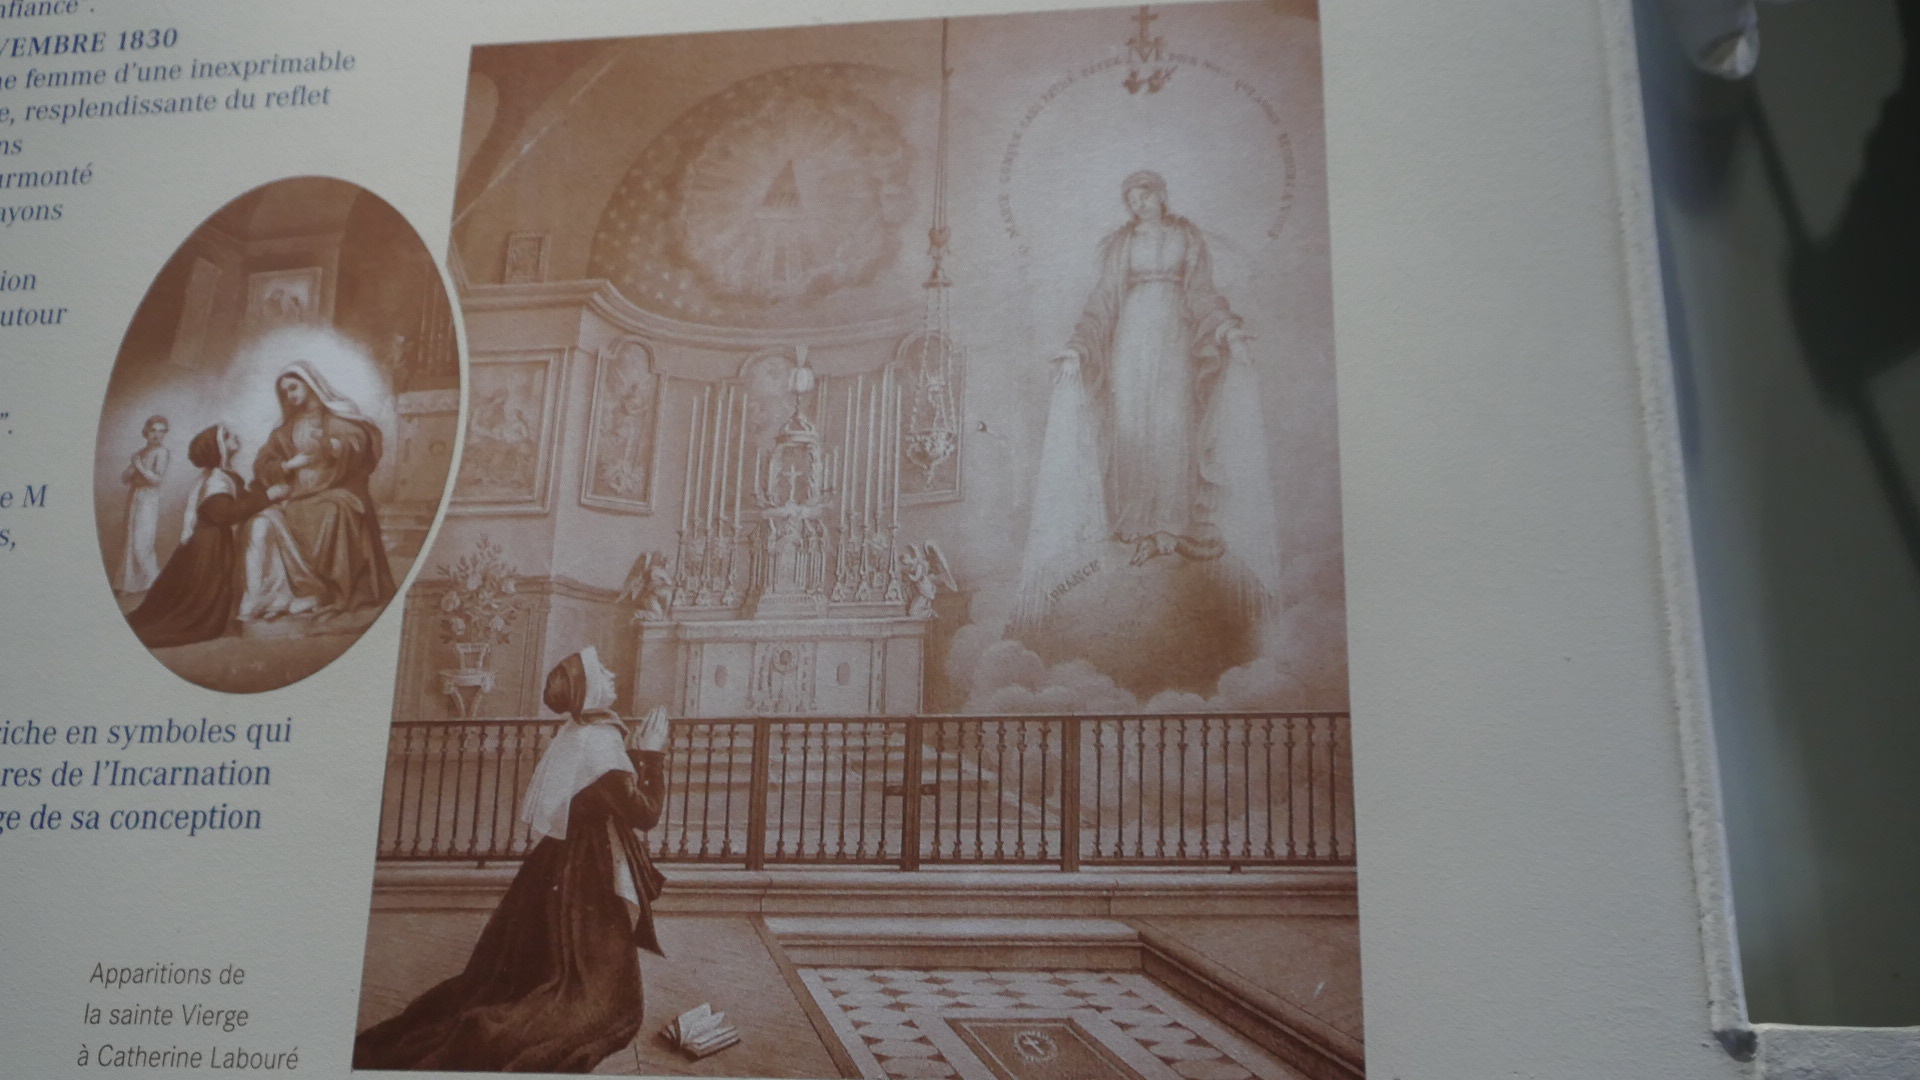 Poster at Rue du Bac where the Virgin Mary appeared to Catherine LaBouré